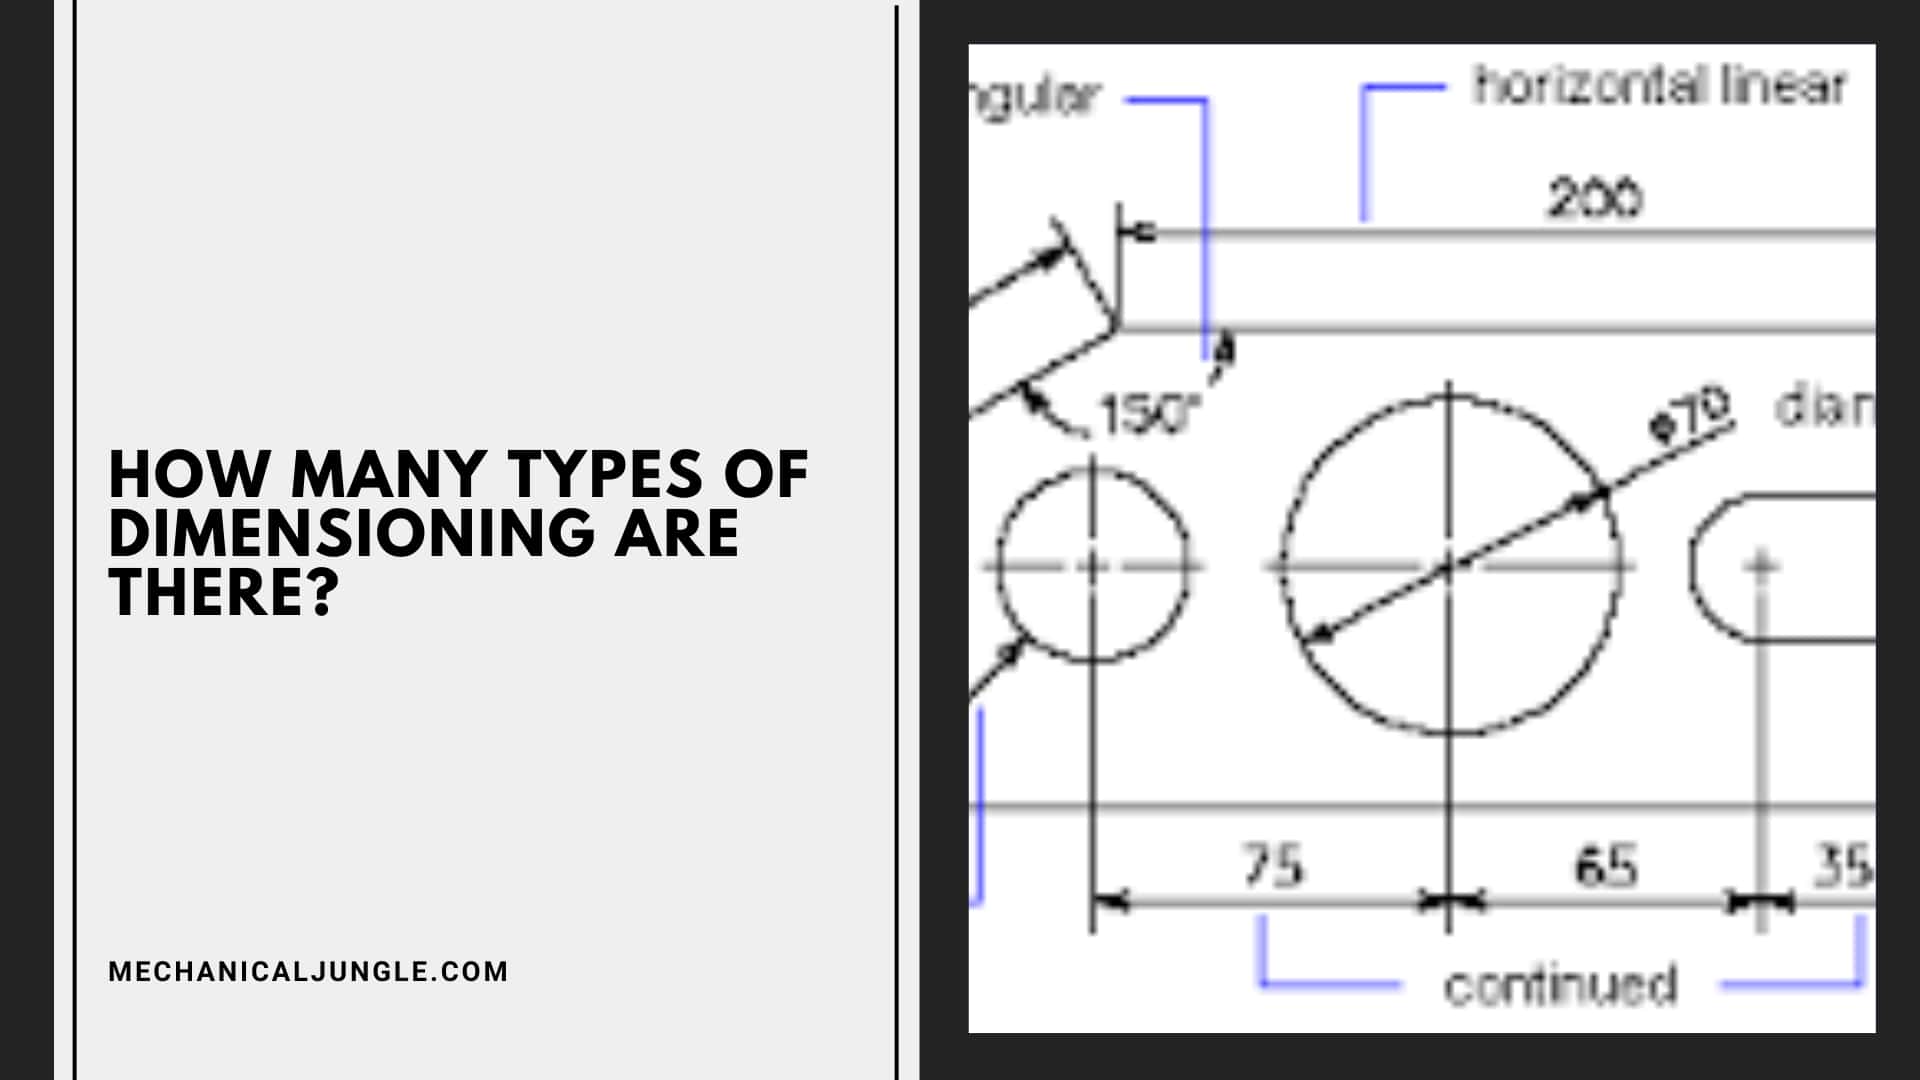 How Many Types of Dimensioning Are There?